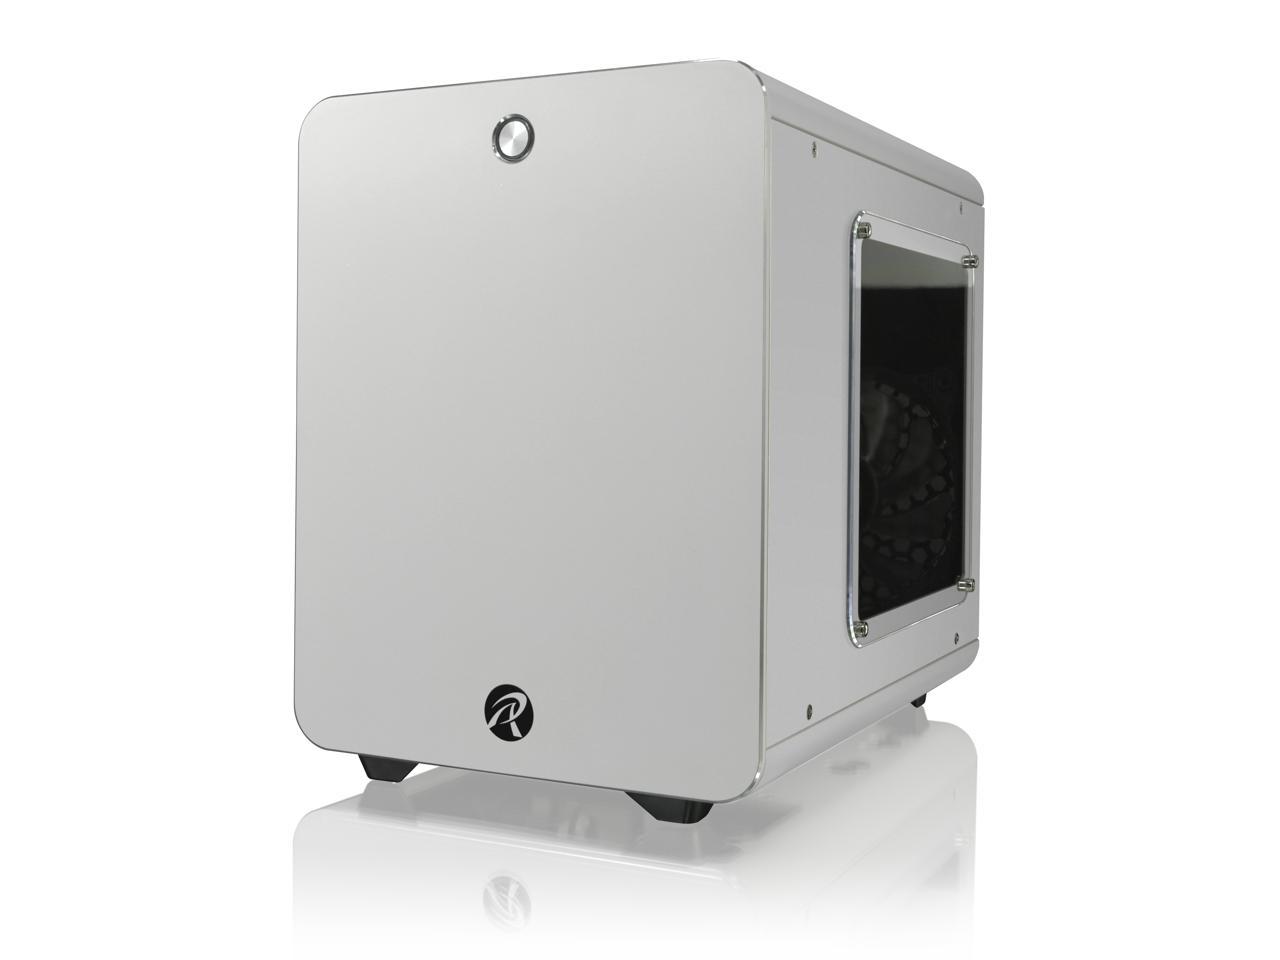 RAIJINTEK METIS PLUS WHITE, a Alu. M-ITX Case, is with one 12025 LED fan at rear, USB 3.0* 2, Ventilate holes at top, Compatible with Standard ATX PSU, 170mm VGA Card length, 160mm CPU Cooler height.